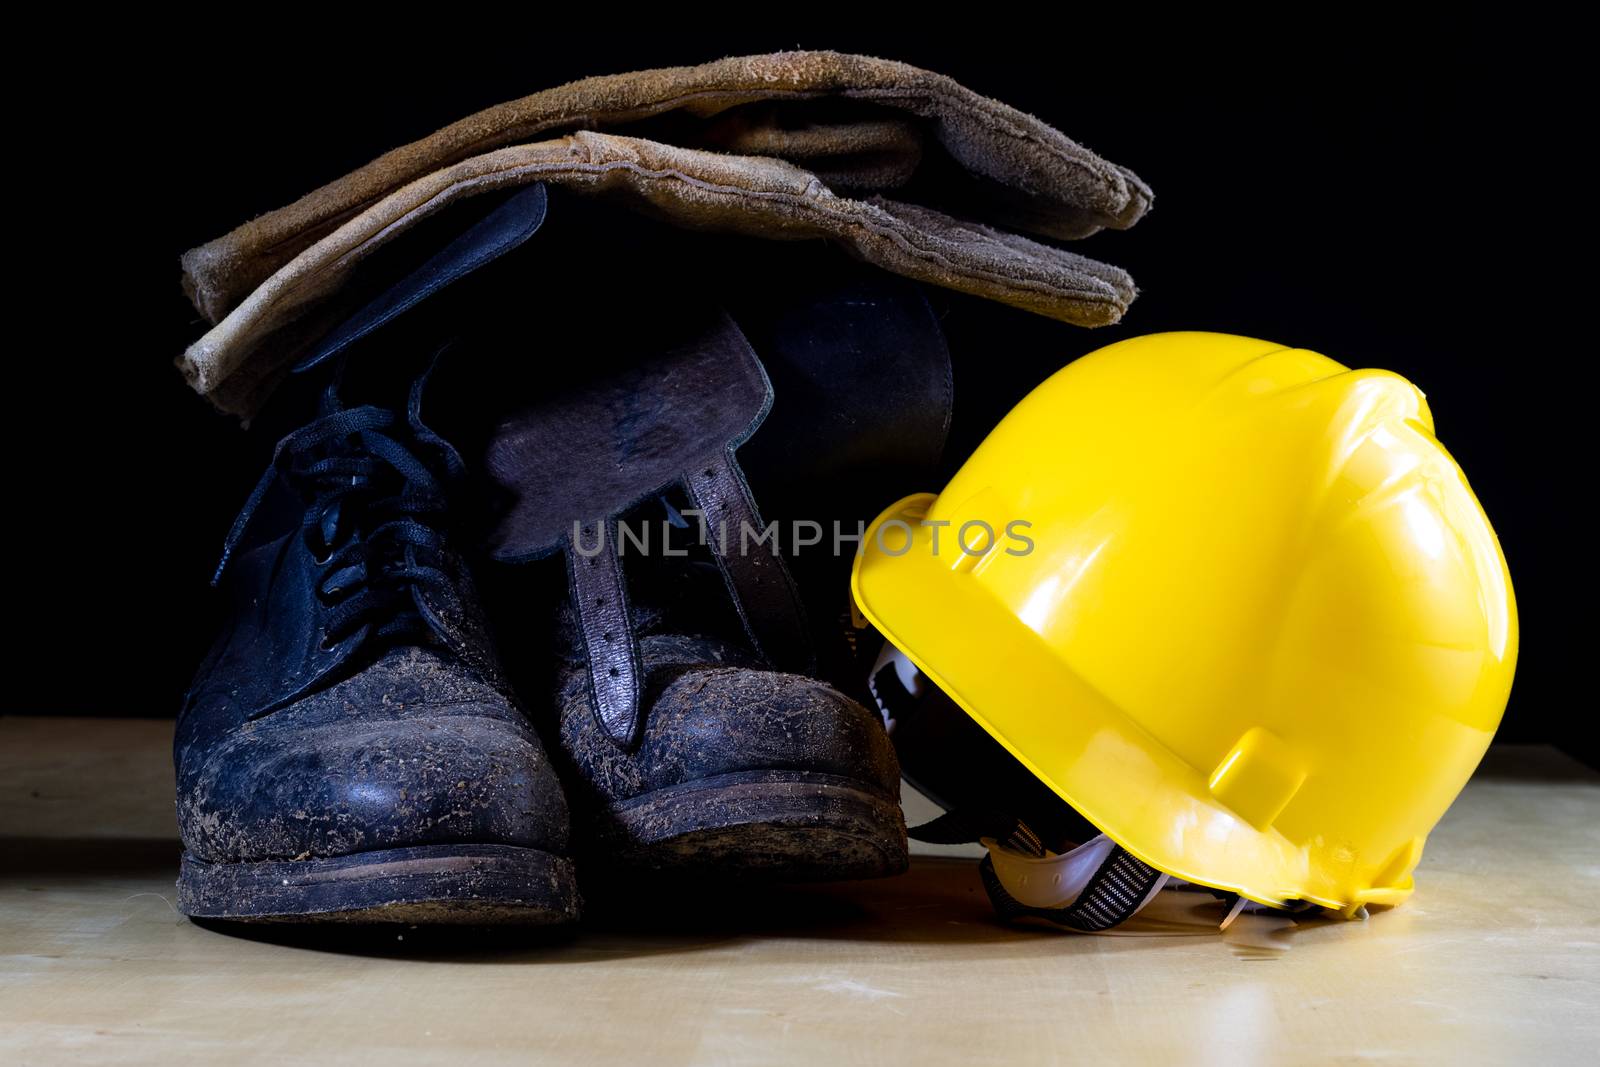 Muddy working boots with helmet and gloves. Accessories for the worker. Black background.